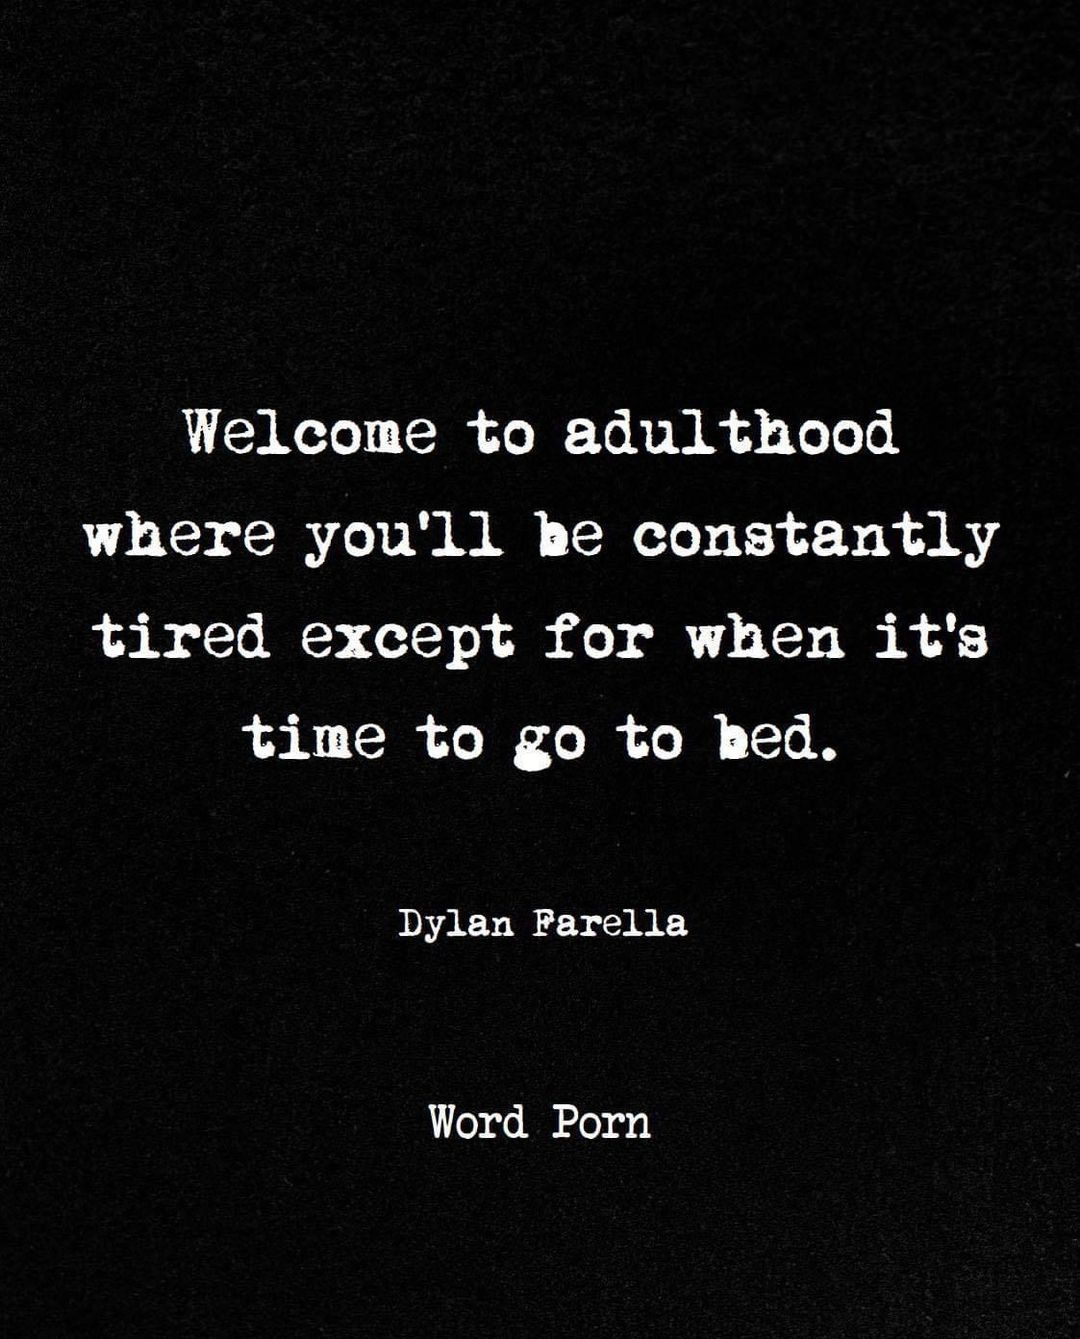 May be a black-and-white image of text that says 'Welcome to adulthood where you'll be constantly tired except for when it's time to go to to bed. Dylan Farella Word Porn'